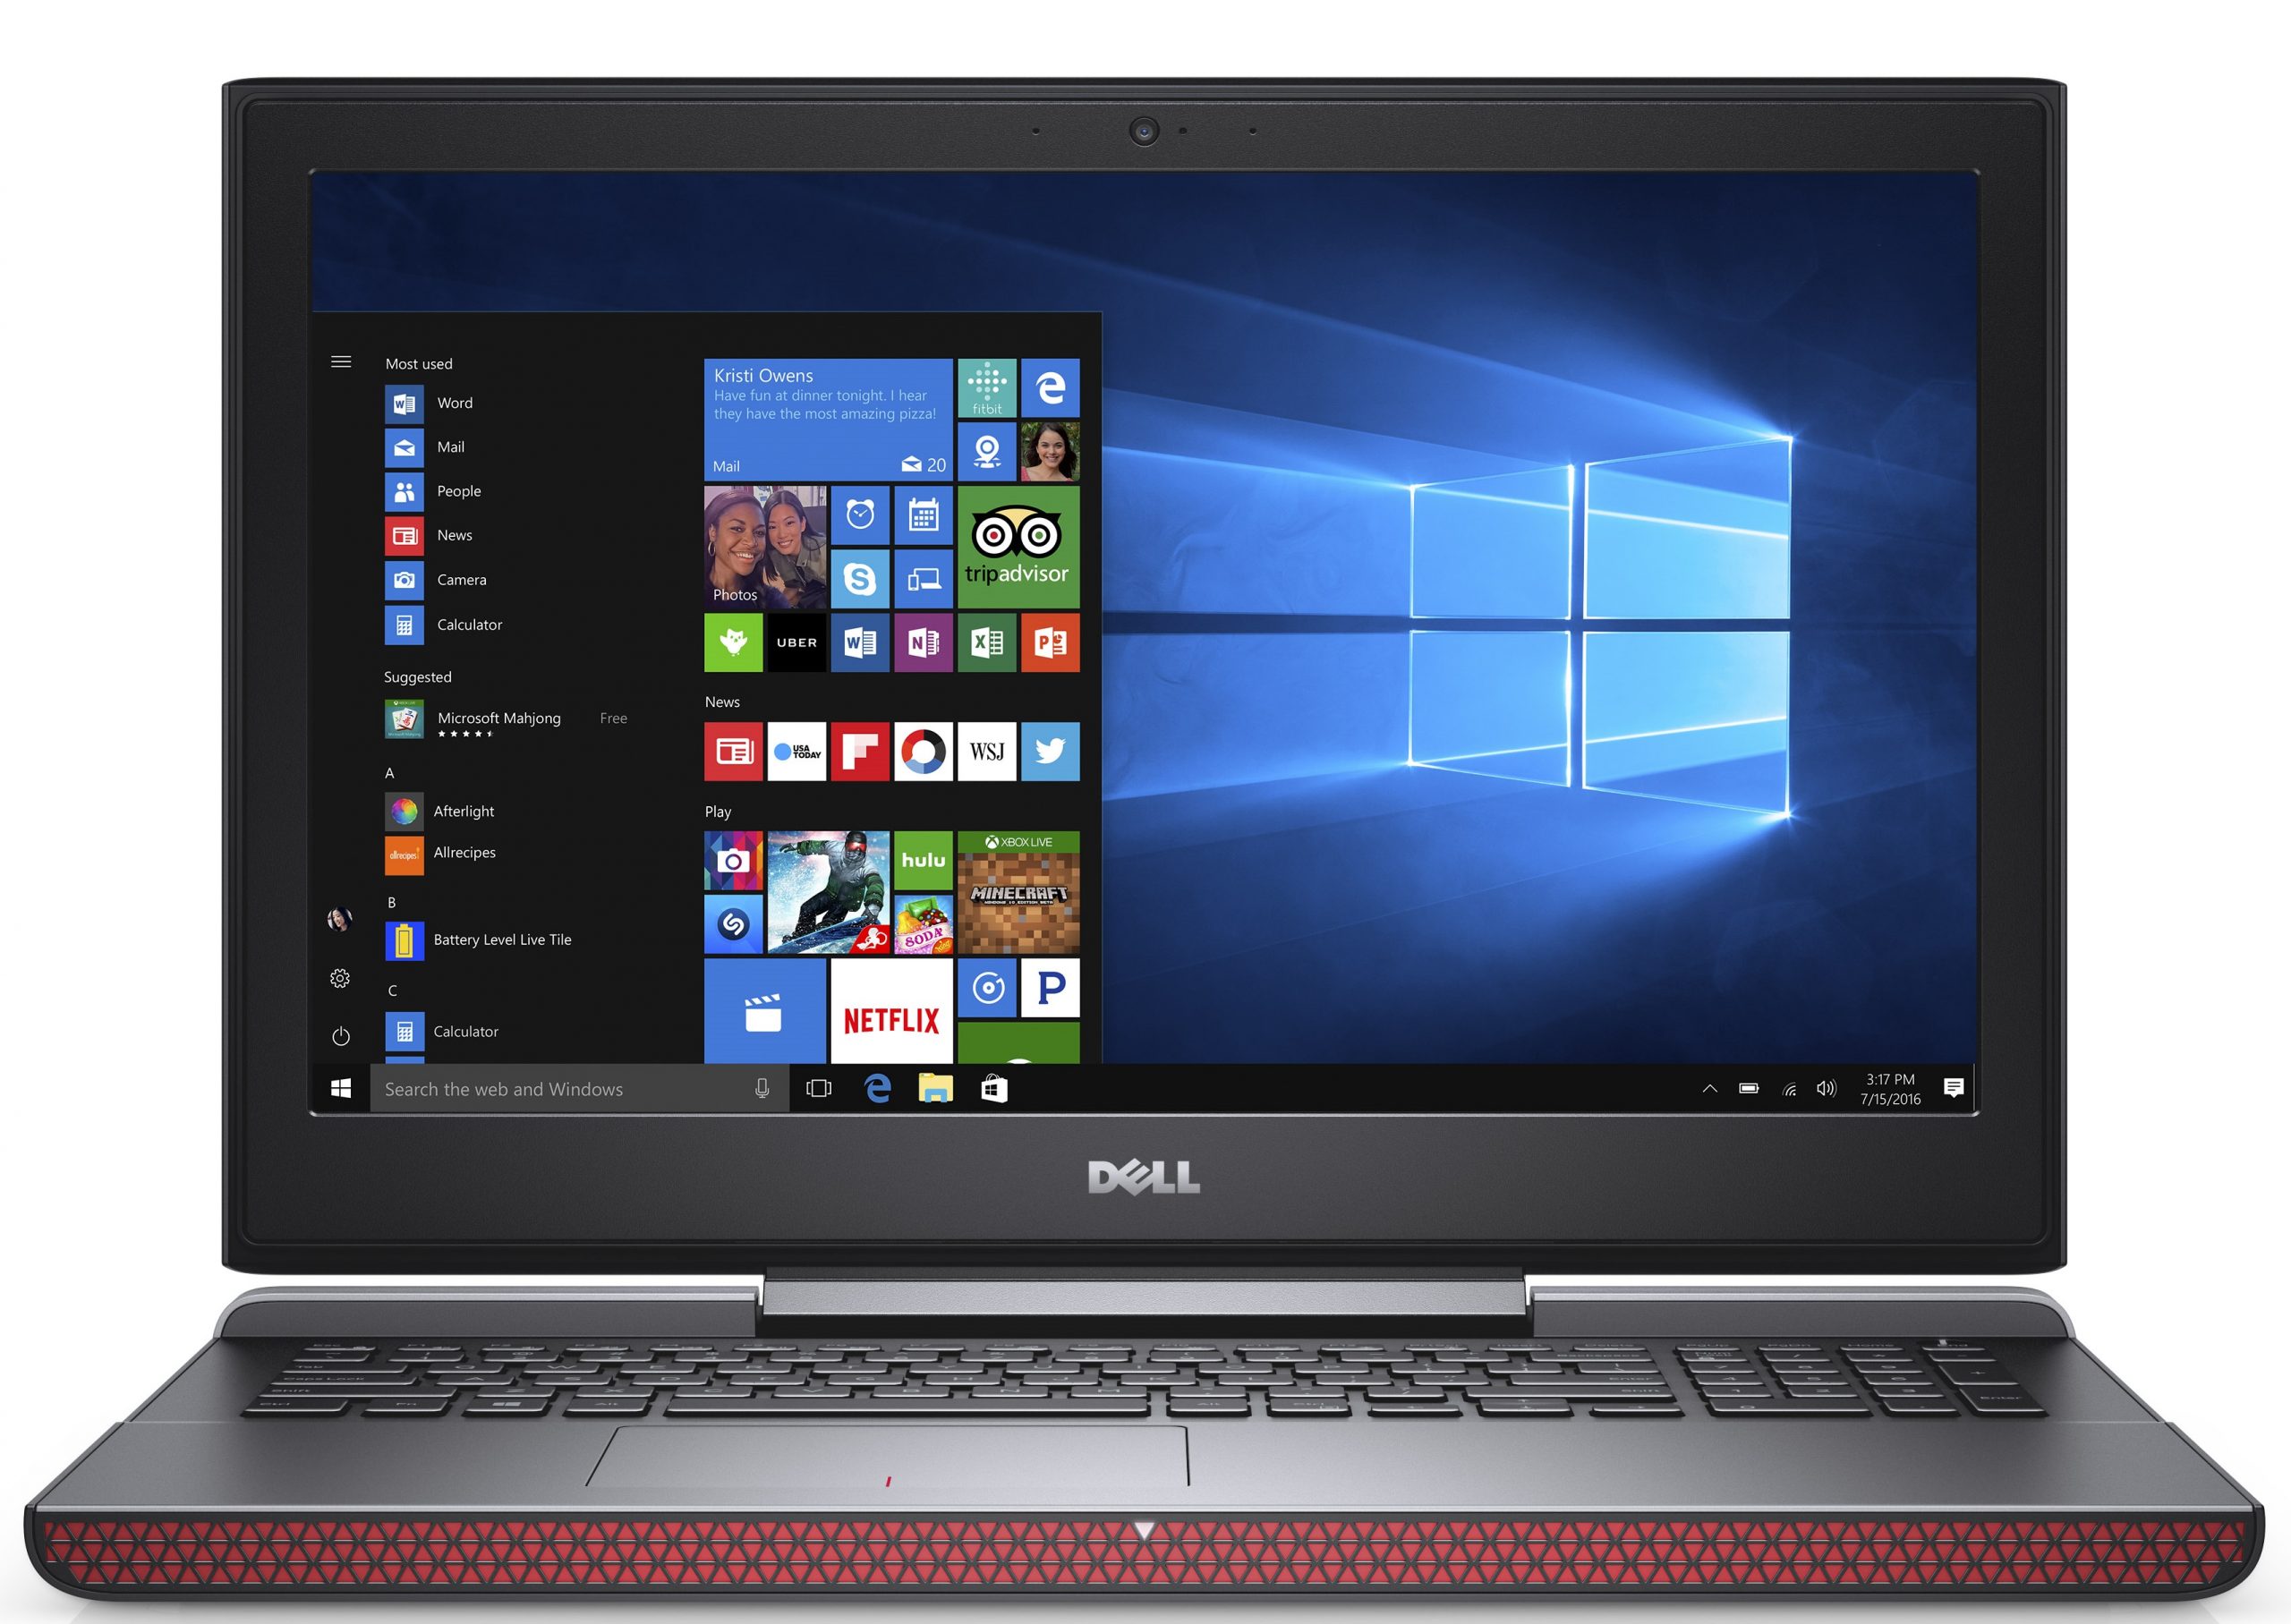 Dell Inspiron 15 Gaming Laptop Now Available in PH: 6th Gen Core i7 and GTX960M